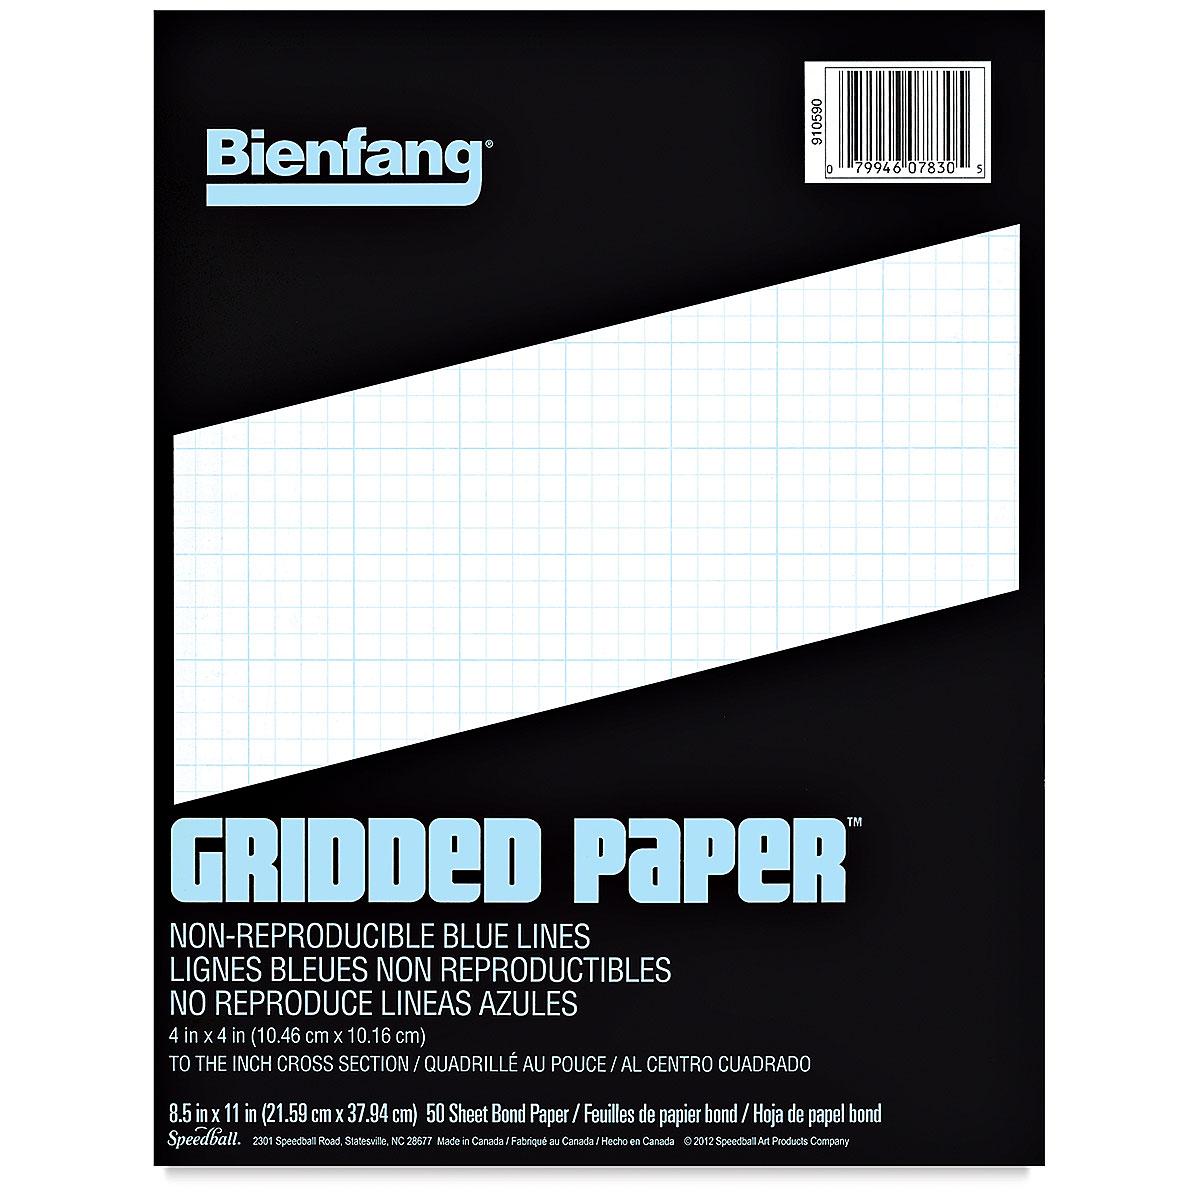 Better Office Products Graph Paper Pad, 8.5 x 11, 50 Sheets